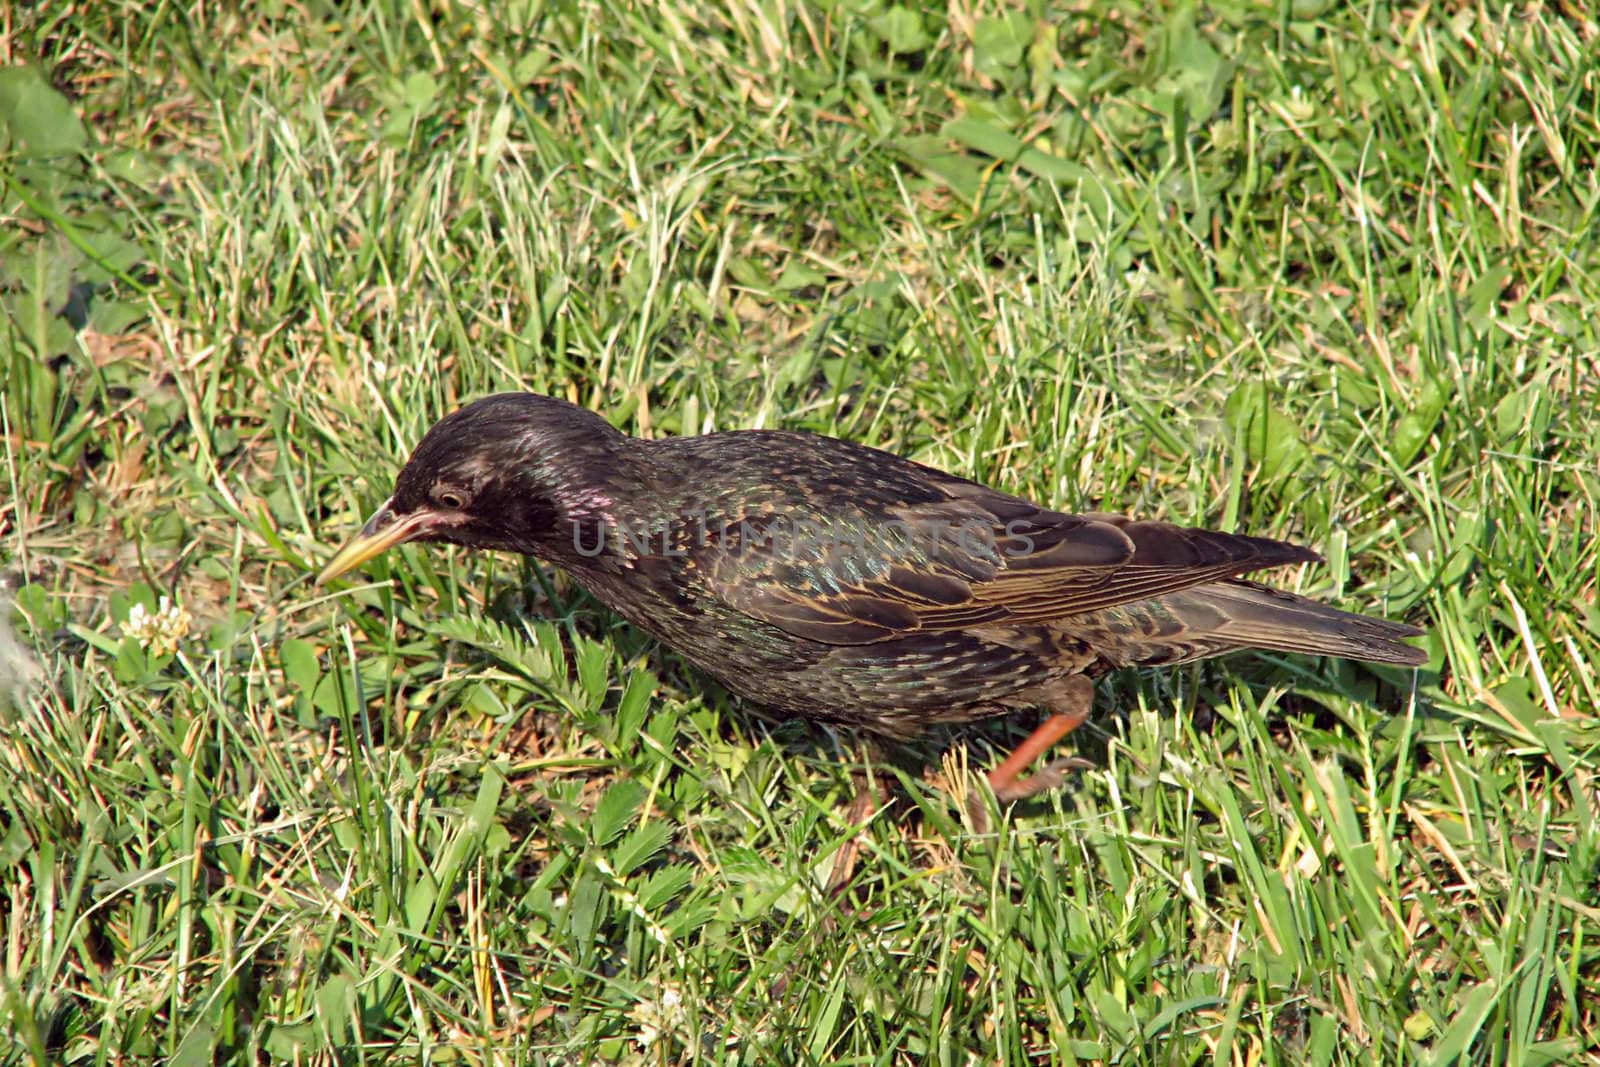 A young starling seeking the food in the grass